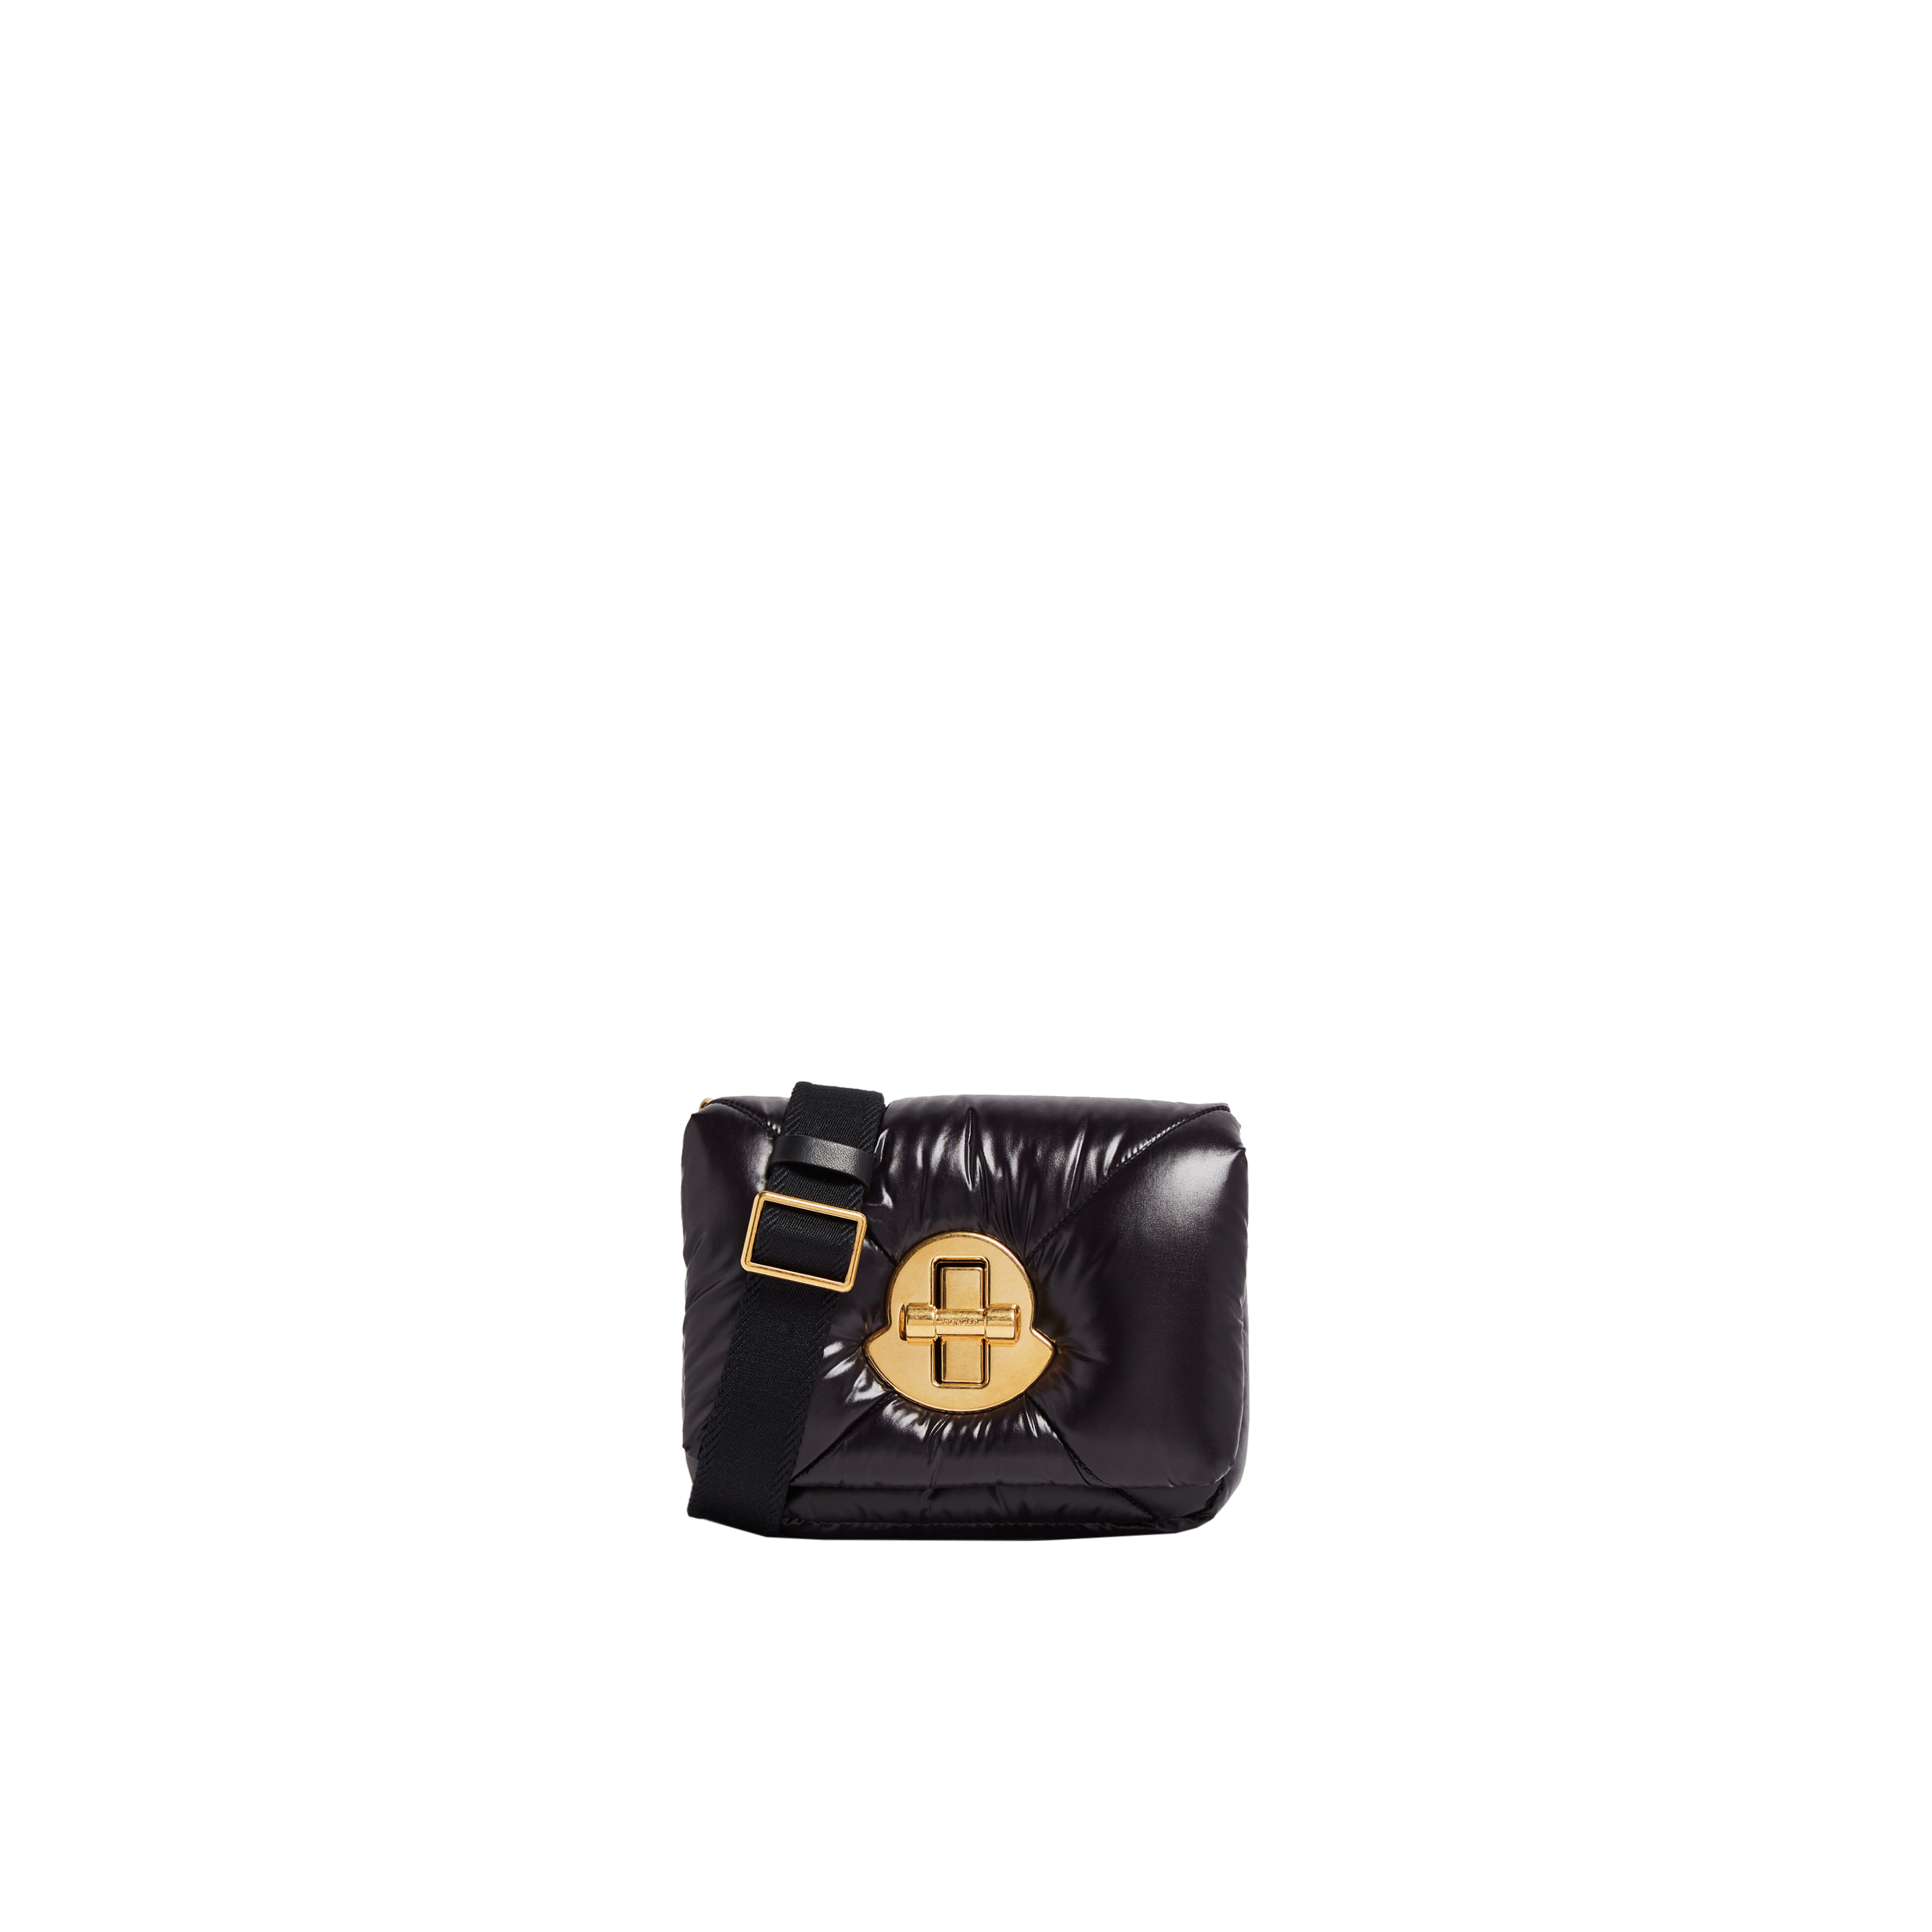 Moncler Collection Puf Mini Cross Body Bag, Black, Size: One Size